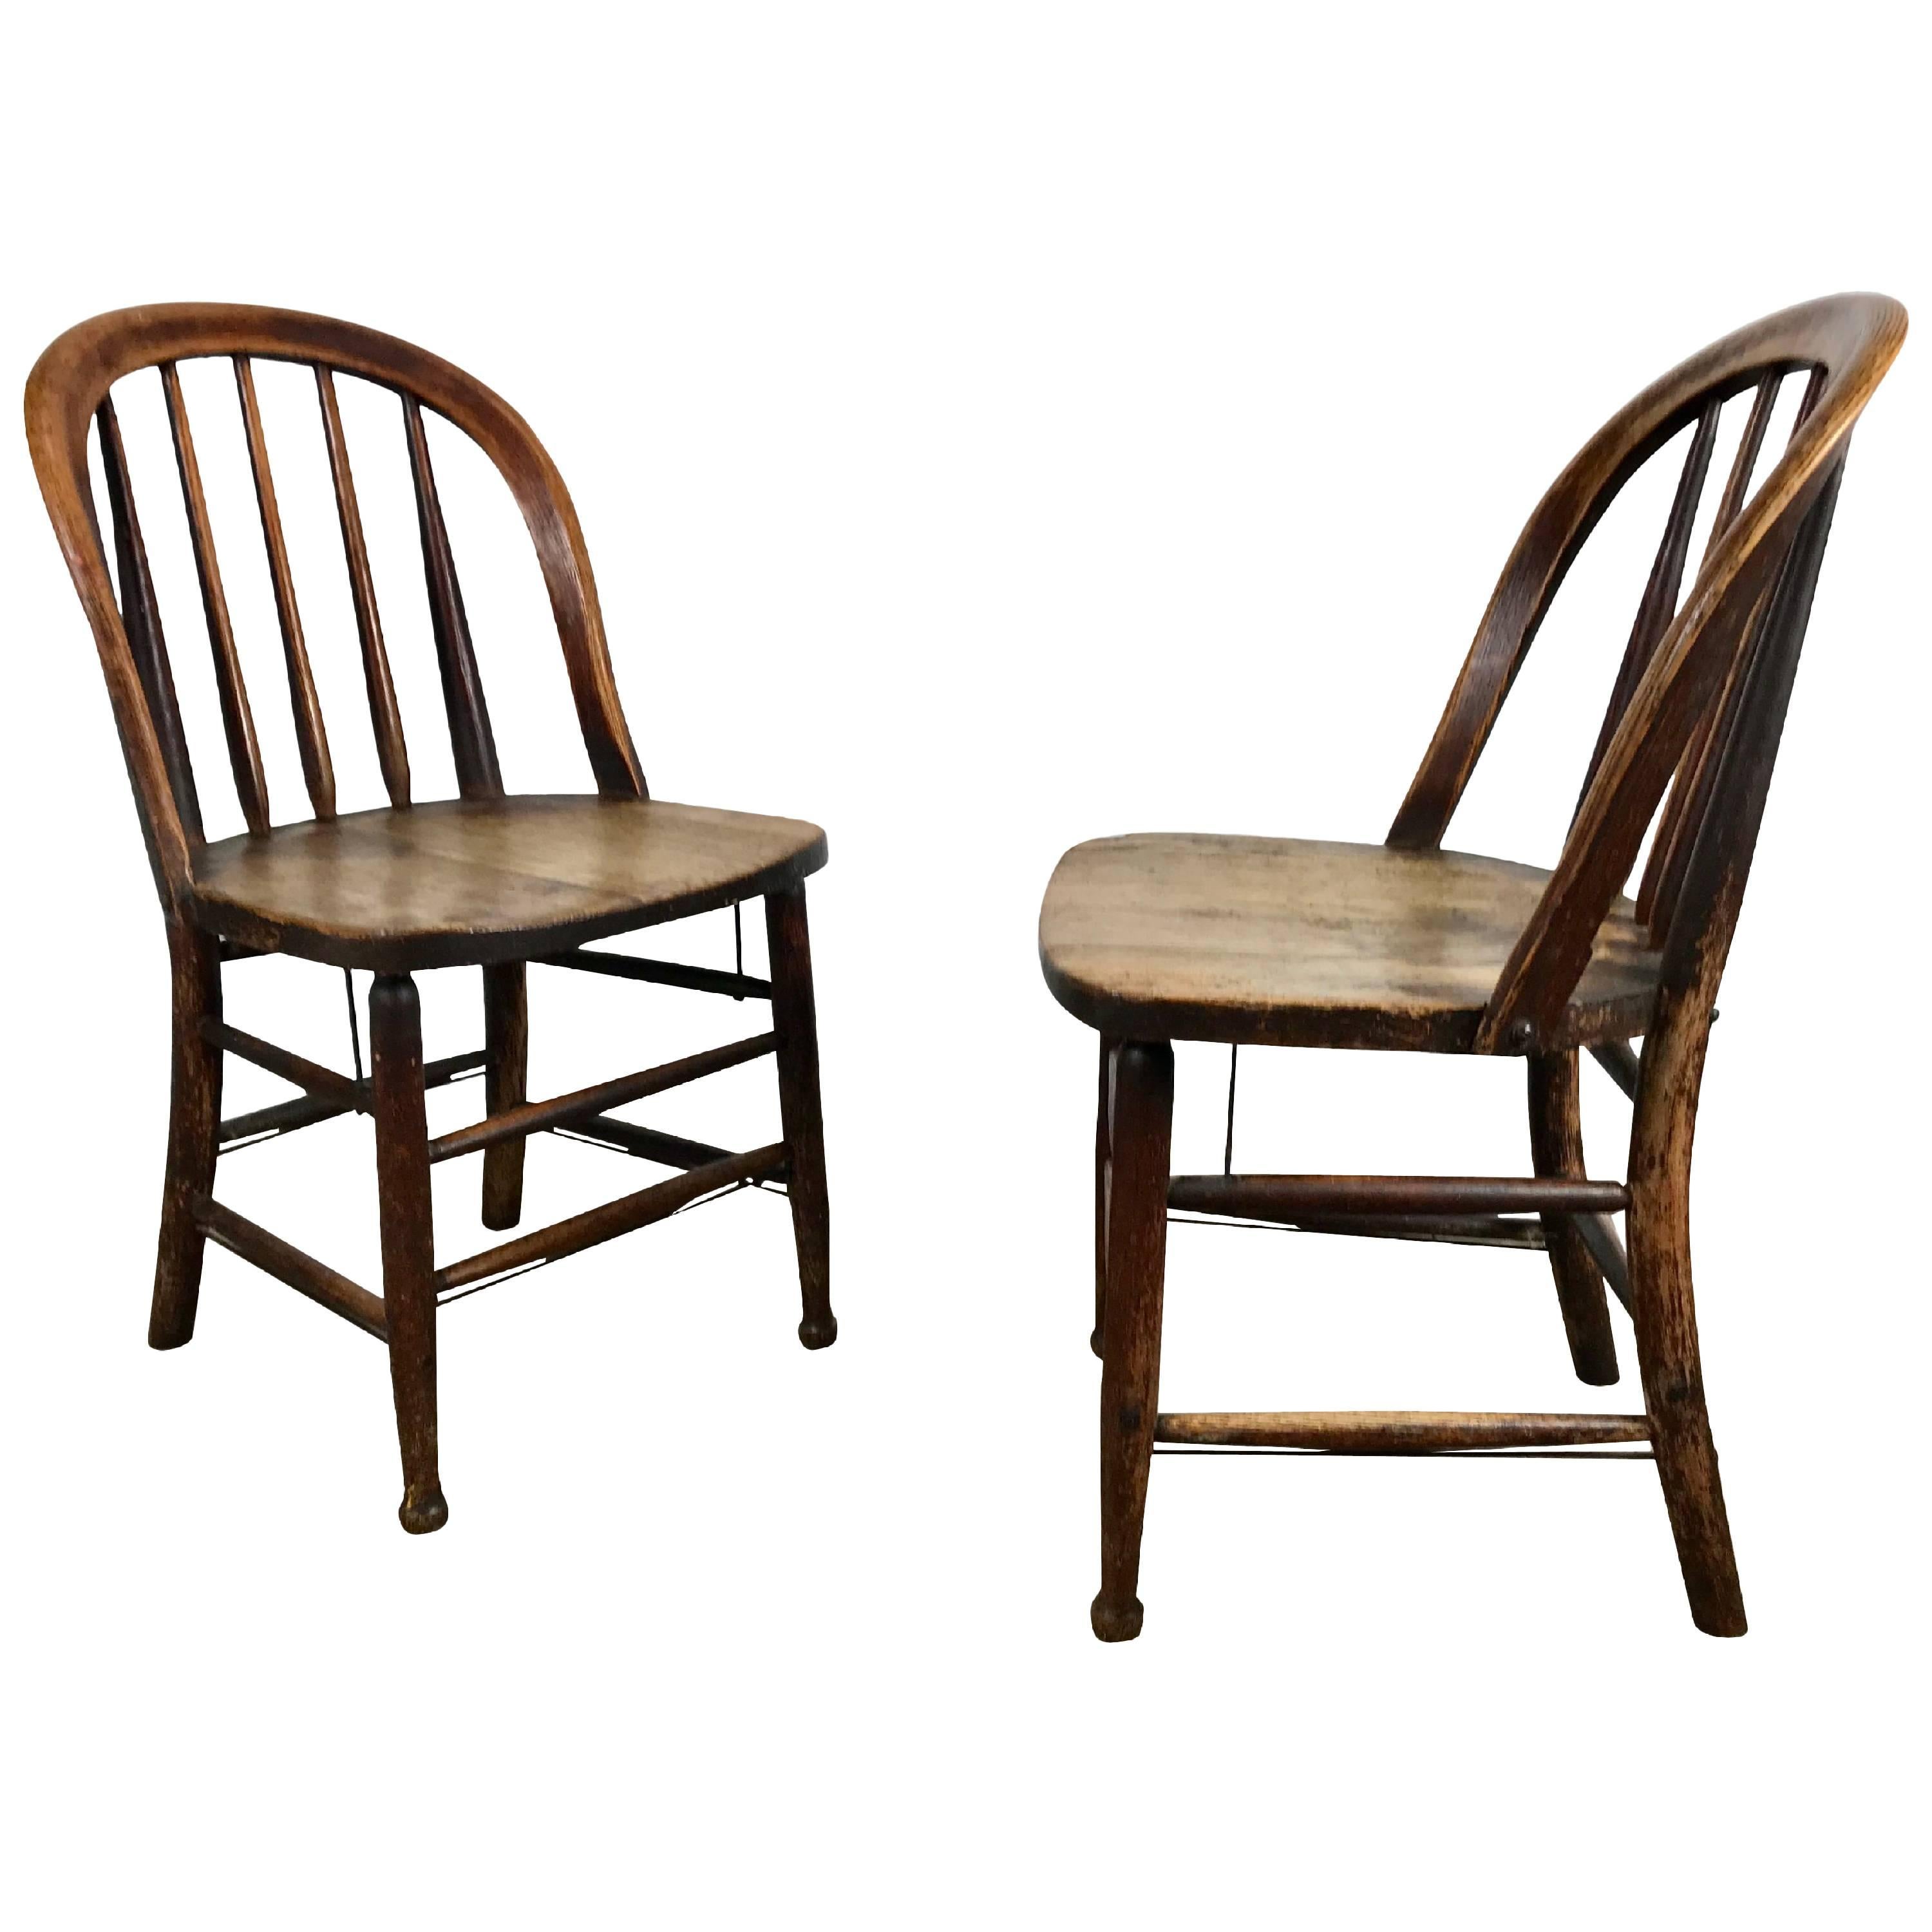 Pair of Early Oak Antique Industrial Side Chairs by Heywood Wakefield